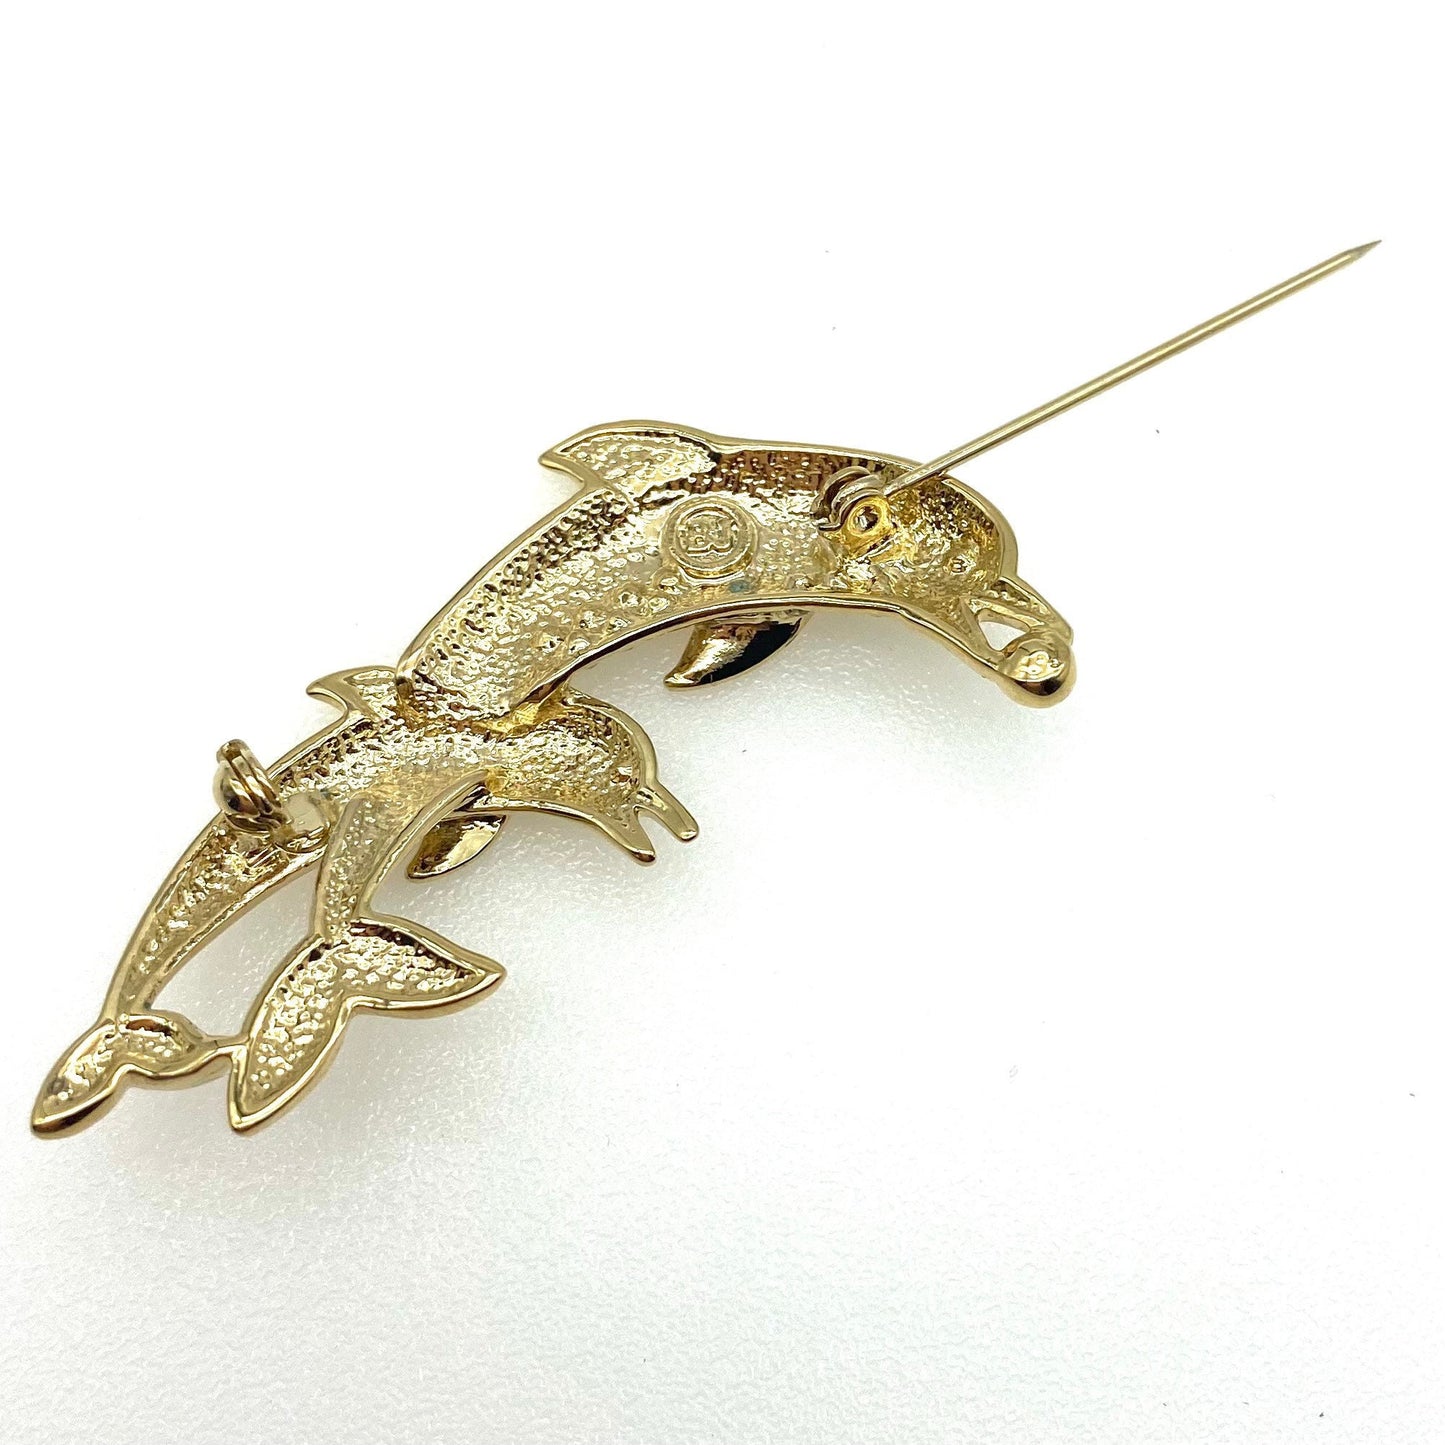 BJ 'Beatrix Jewelry' Leaping Dolphins (Mother and Calf) Brooch